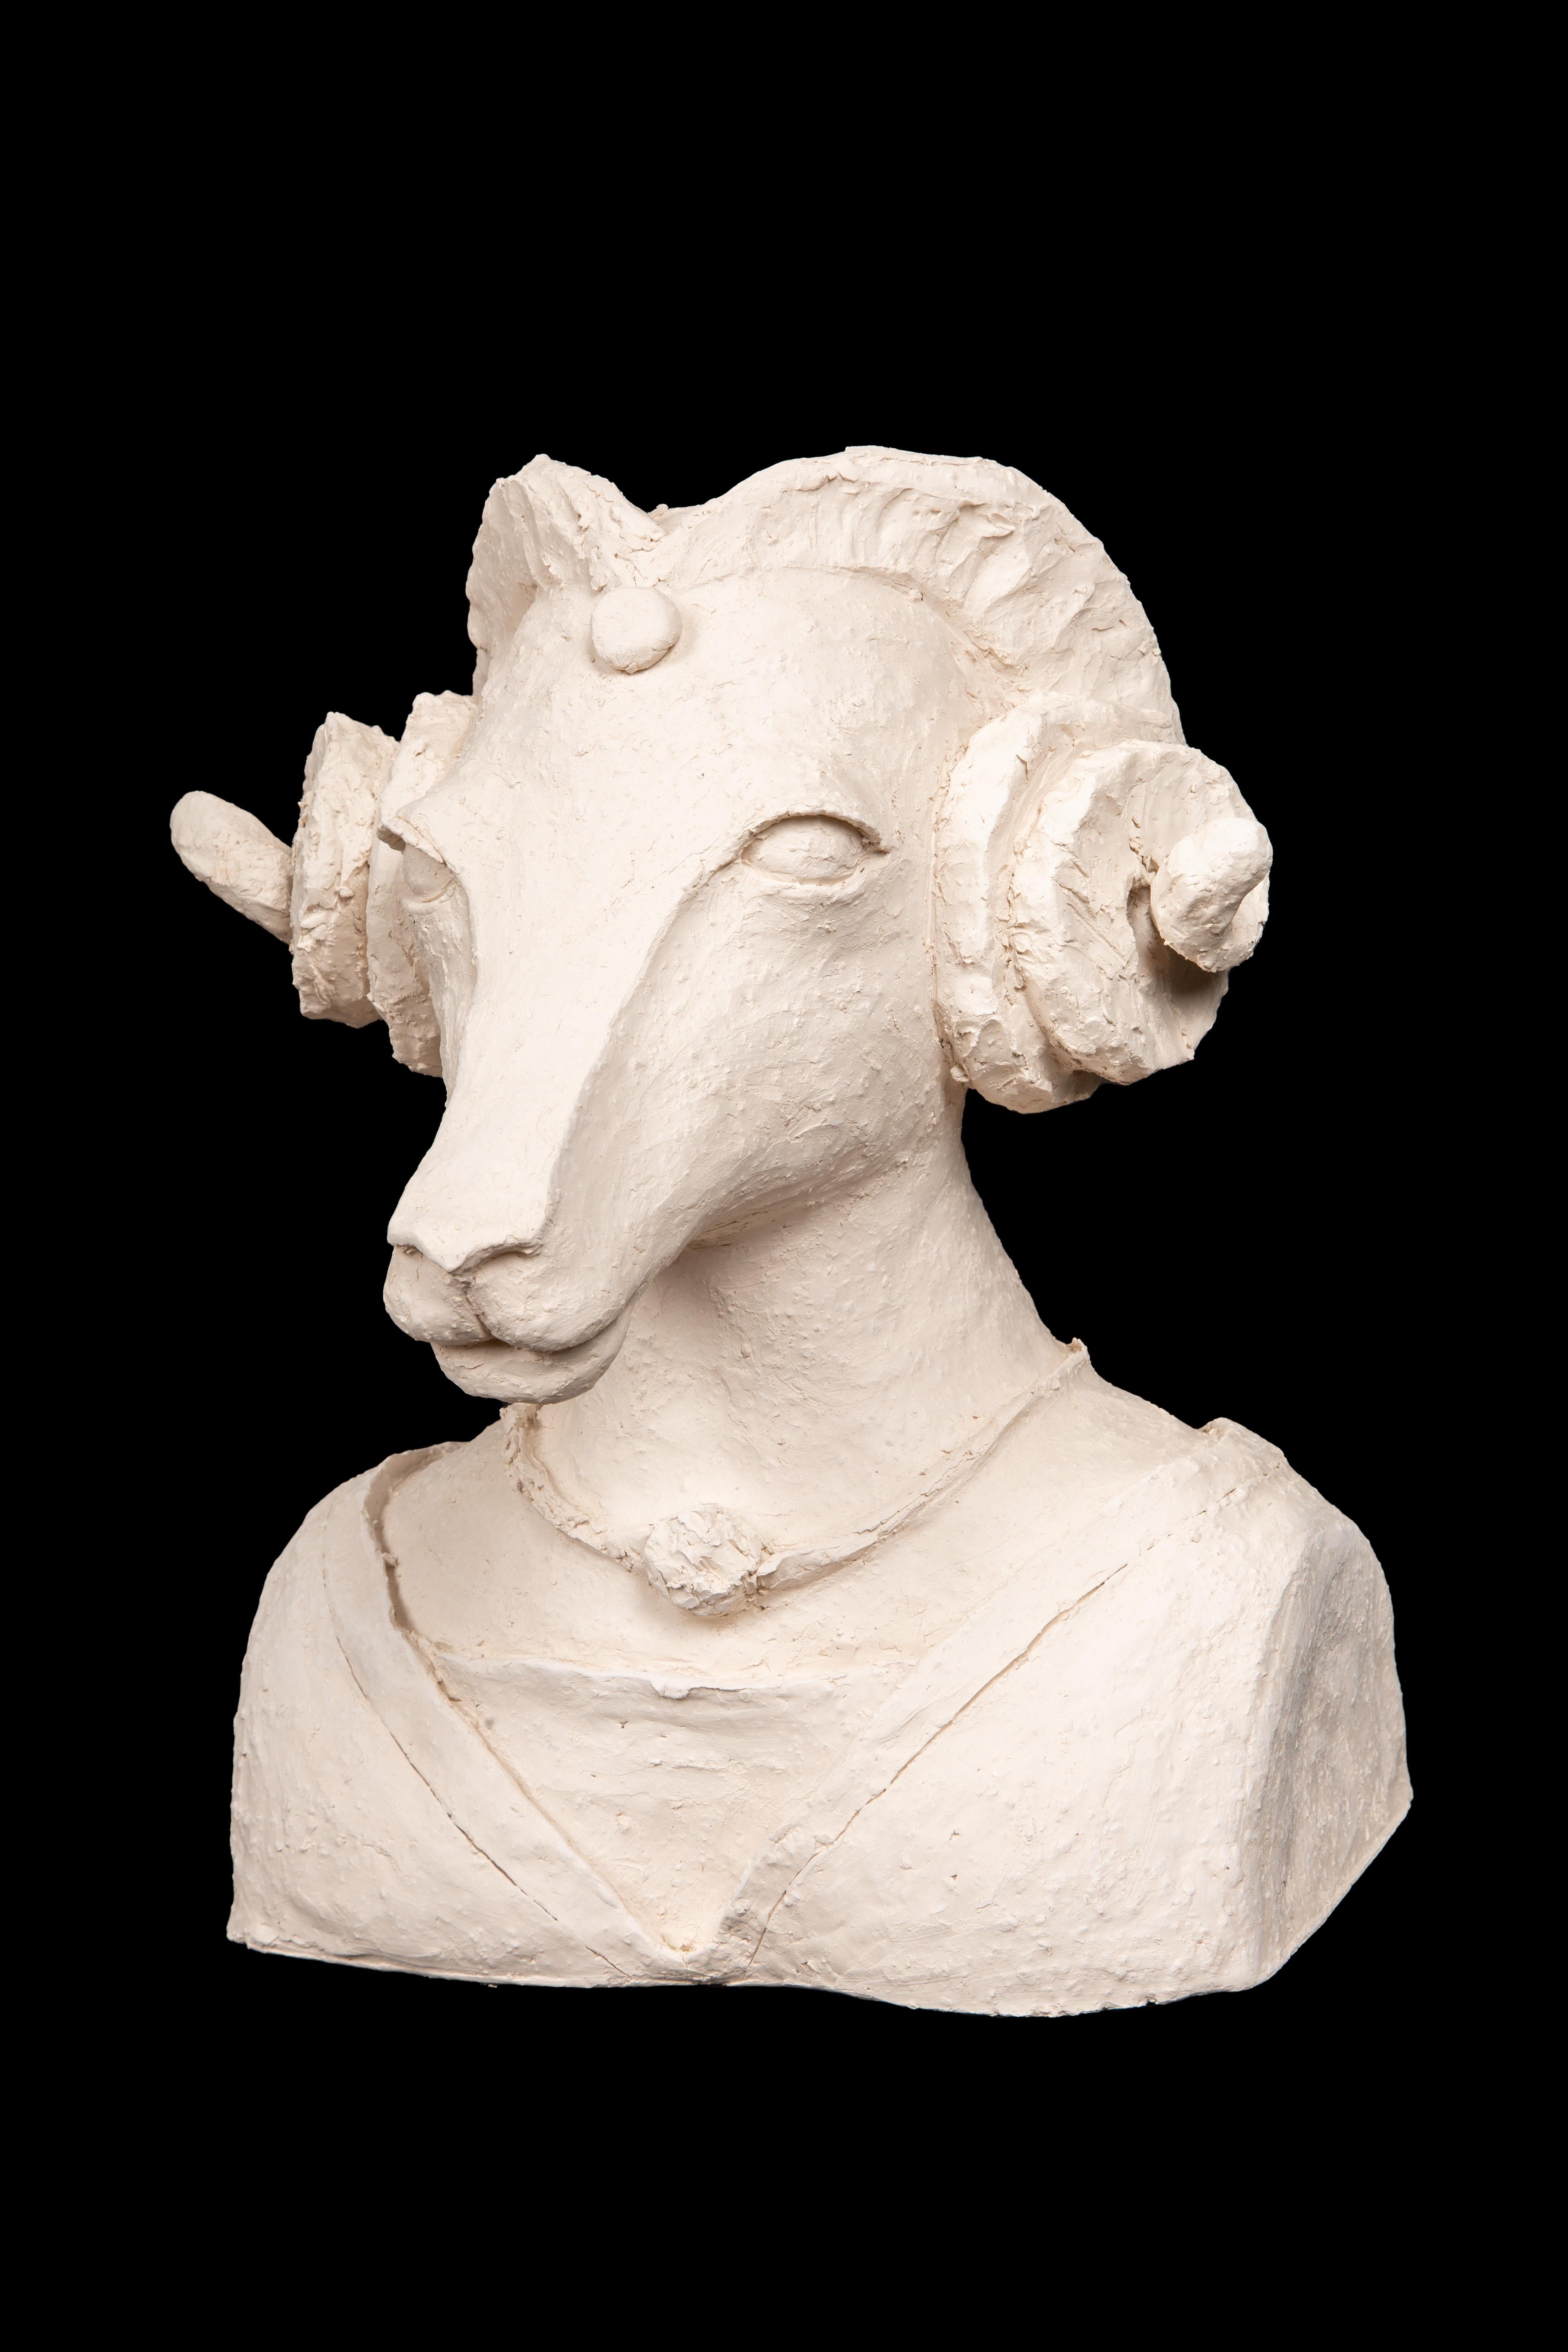 Terracotta Anthropomorphic Ram bust wearing a Ferronnière: In the spirit of Princess Leia from Star War's.

A charming work of art created by the talented artist Laurence Lenglare in France. The sculpture features an anthropomorphic rabbit,